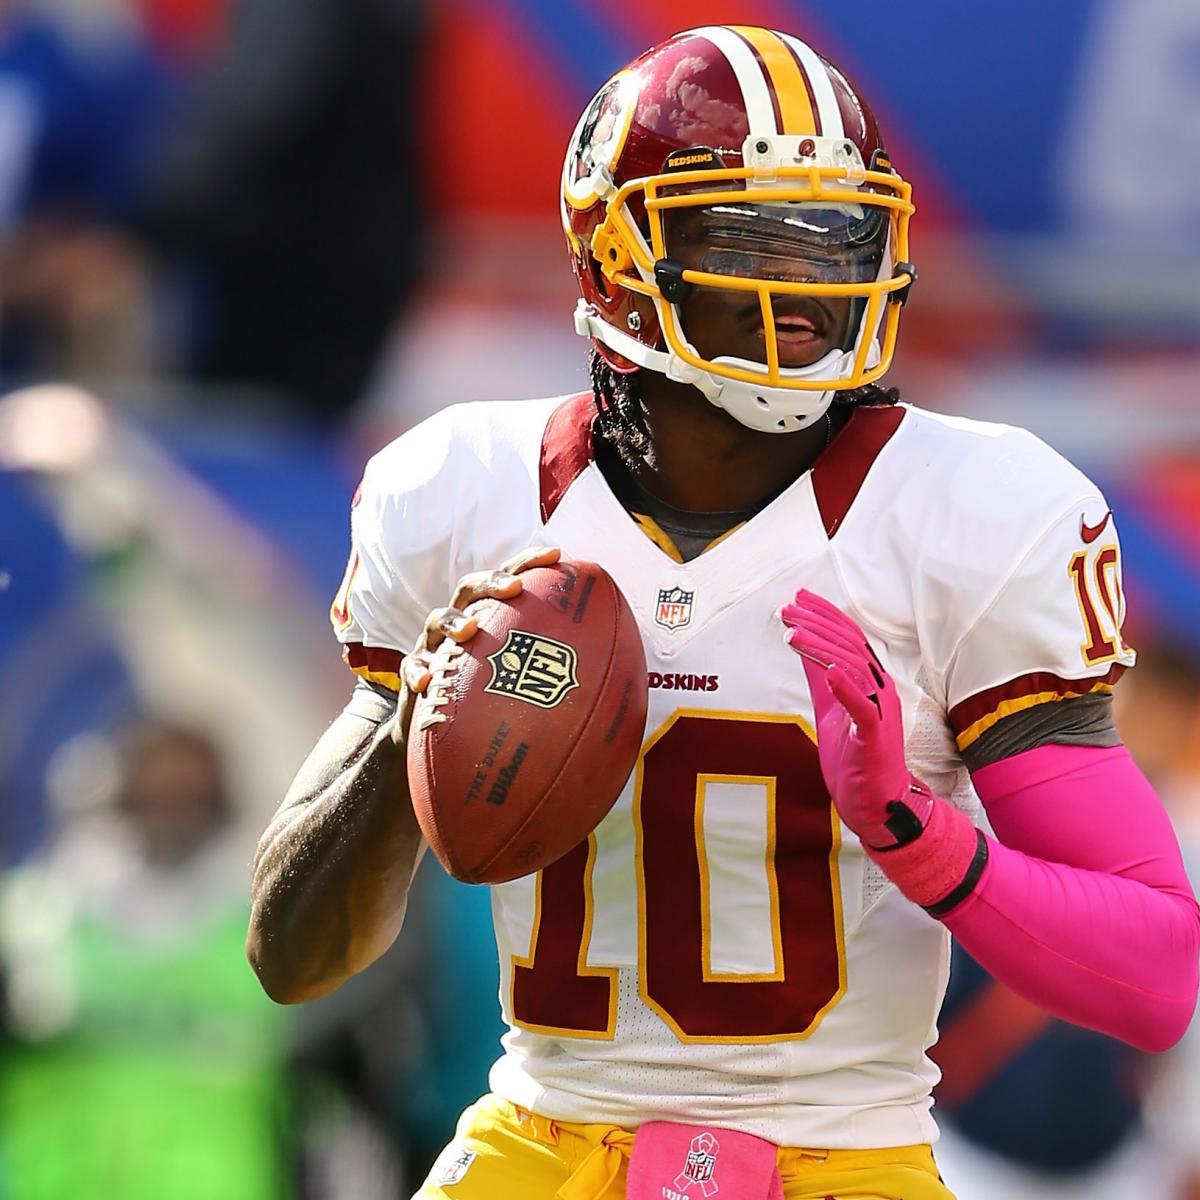 Washington Redskins vs. Pittsburgh Steelers: Preview and